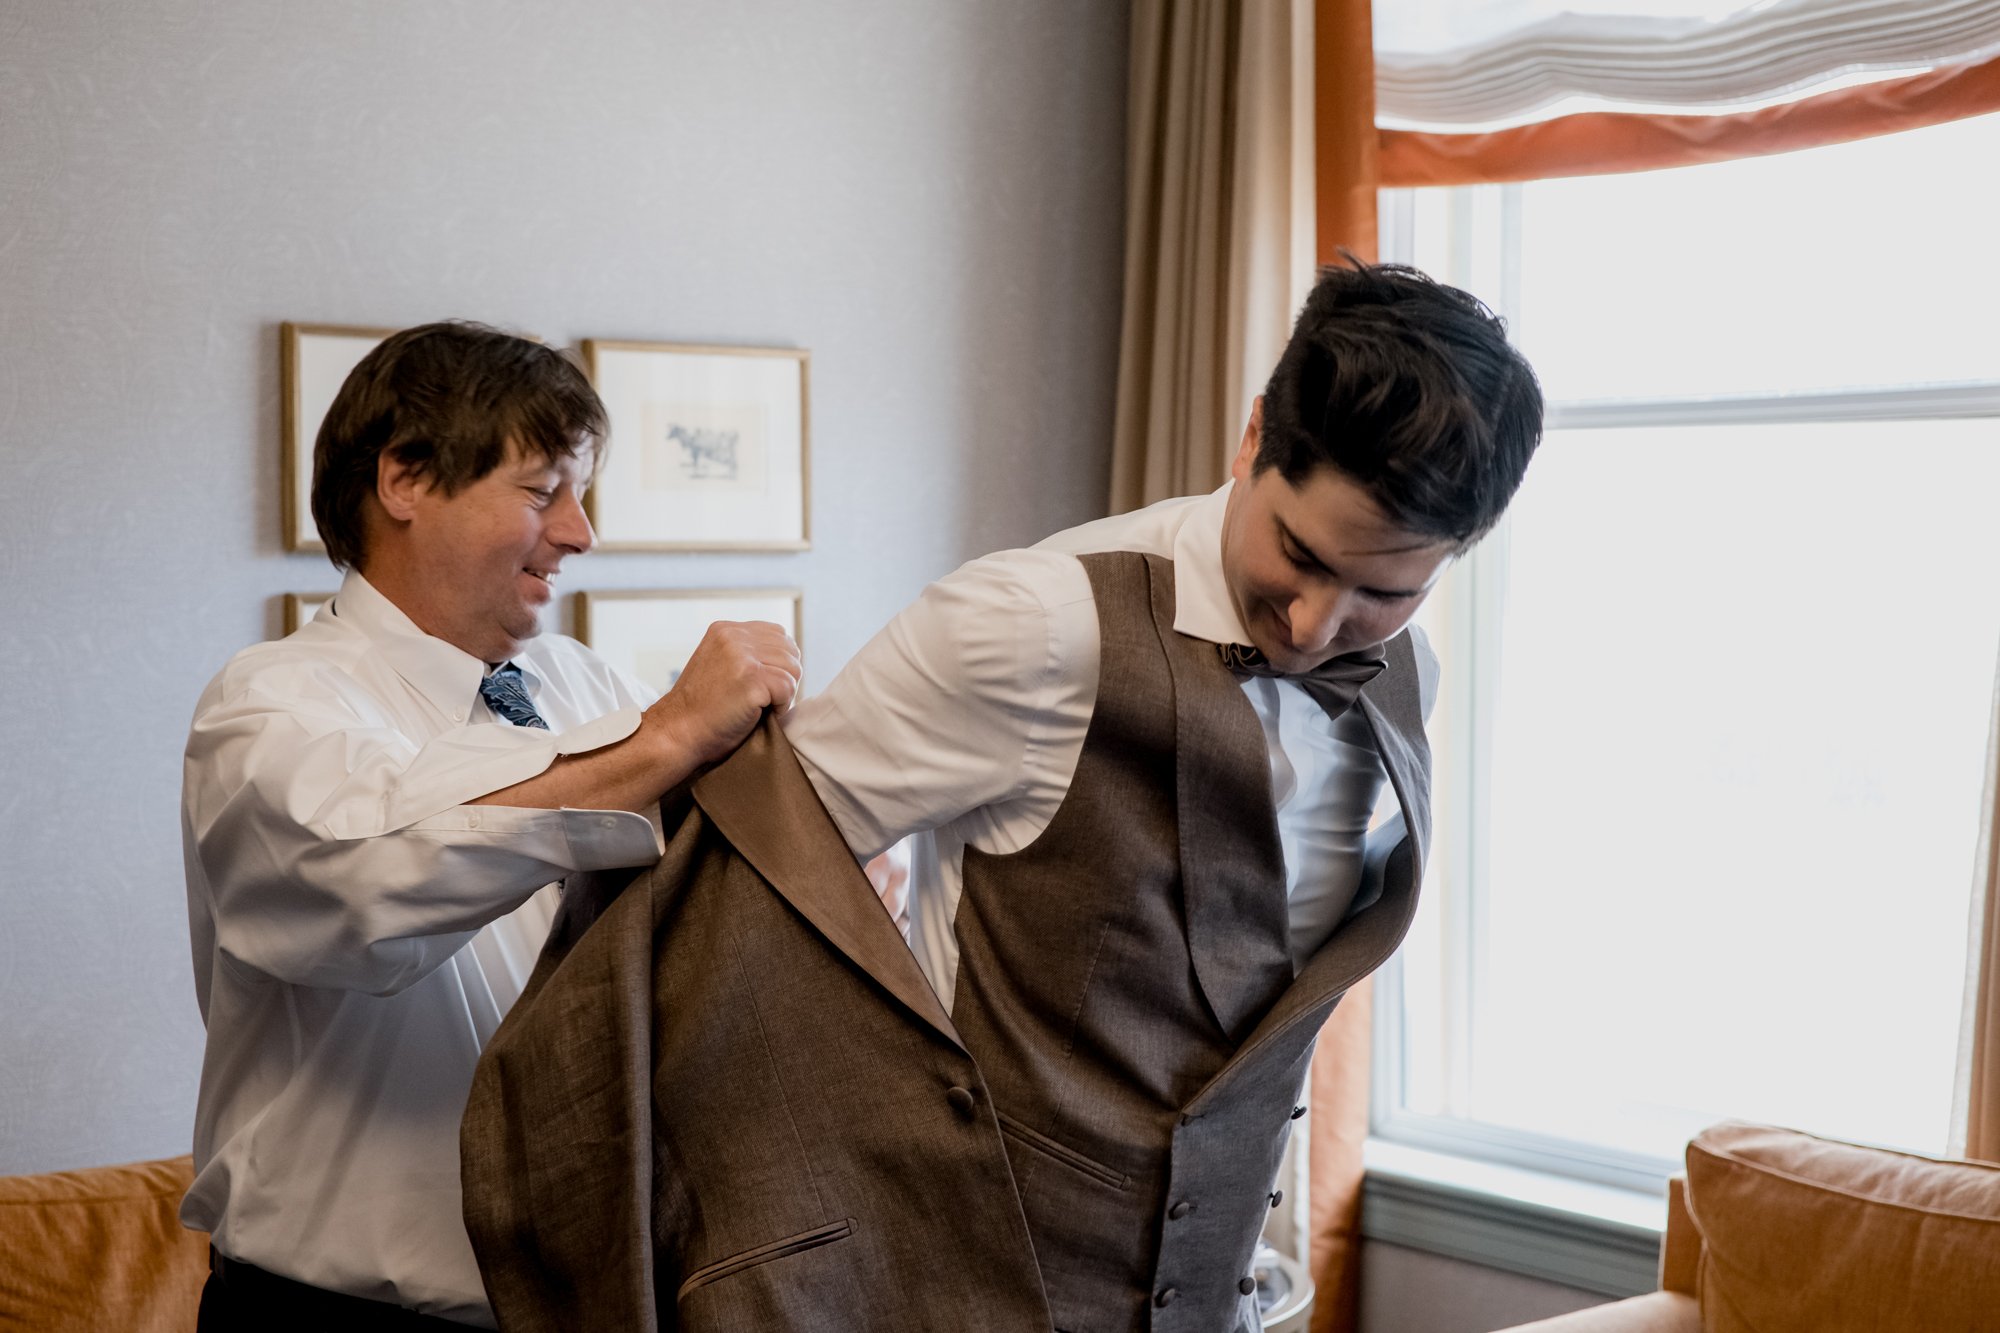 Groom preparations getting ready putting jacket on. Wedding at Hotel Icon